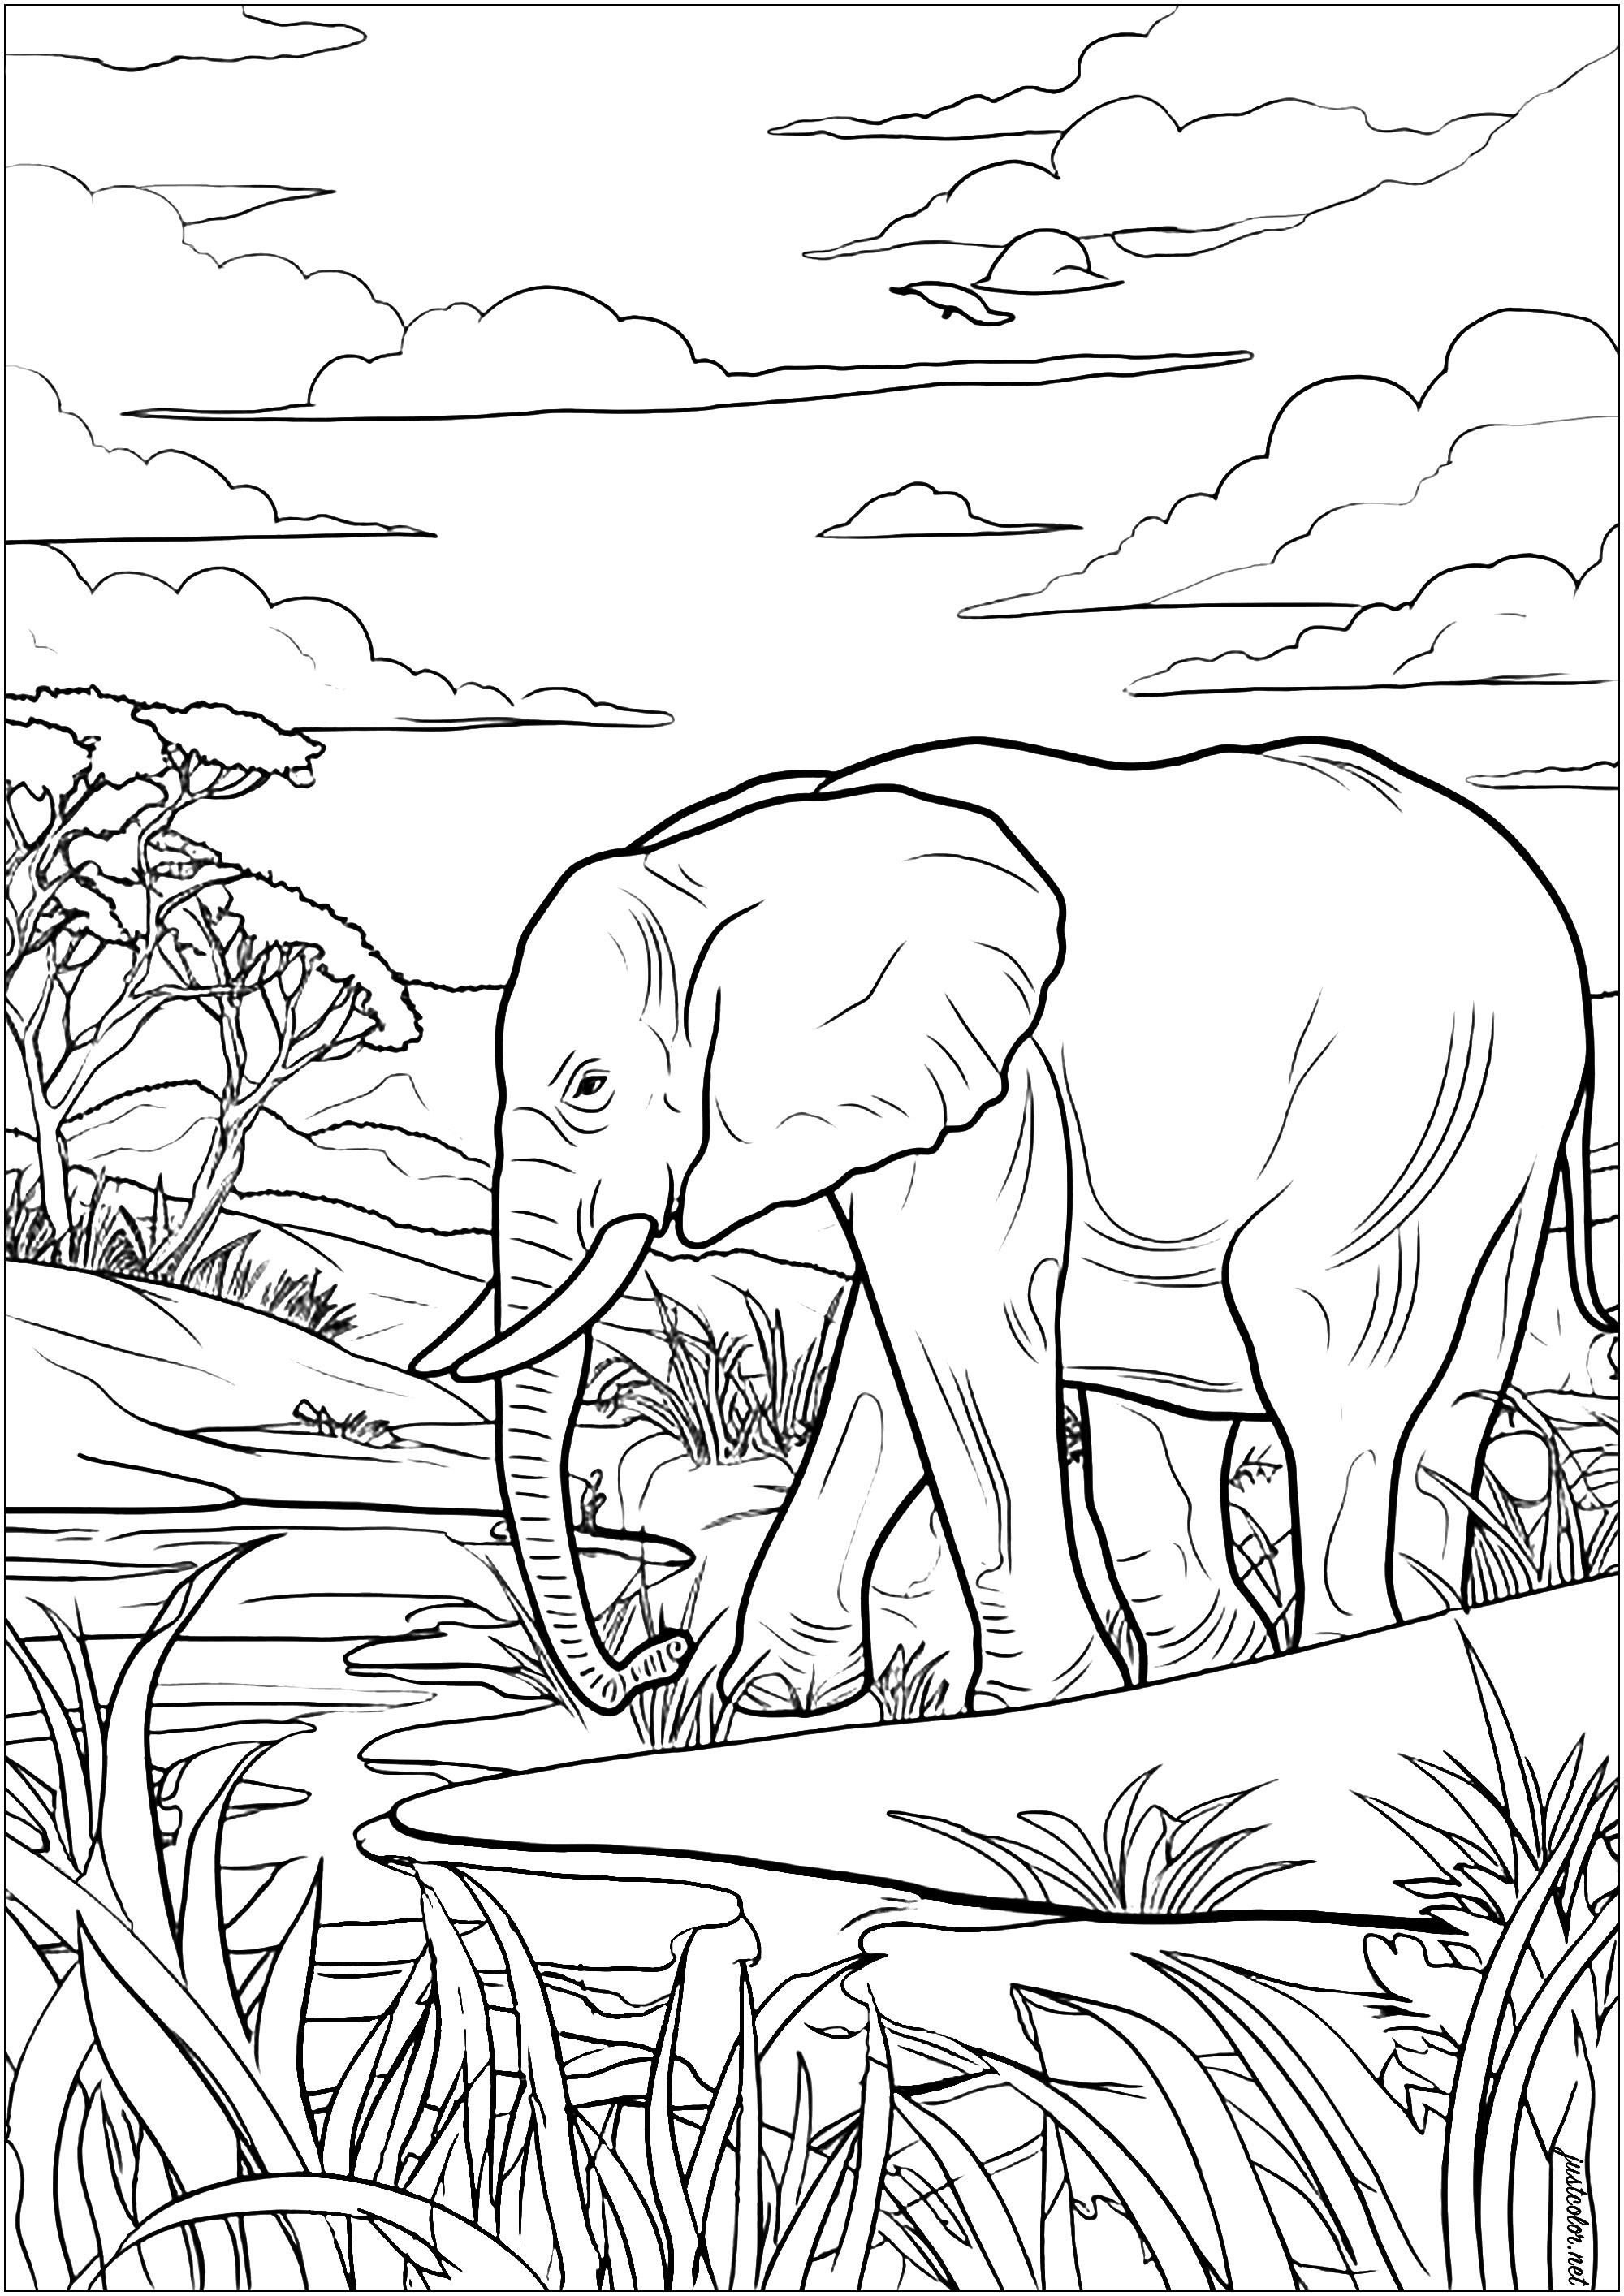 Coloring of an old elephant moving peacefully through the African savannah. A coloring page full of detail, very soothing. This wise Pachyderm strides forward majestically, gazing at the trees and grasses around him.